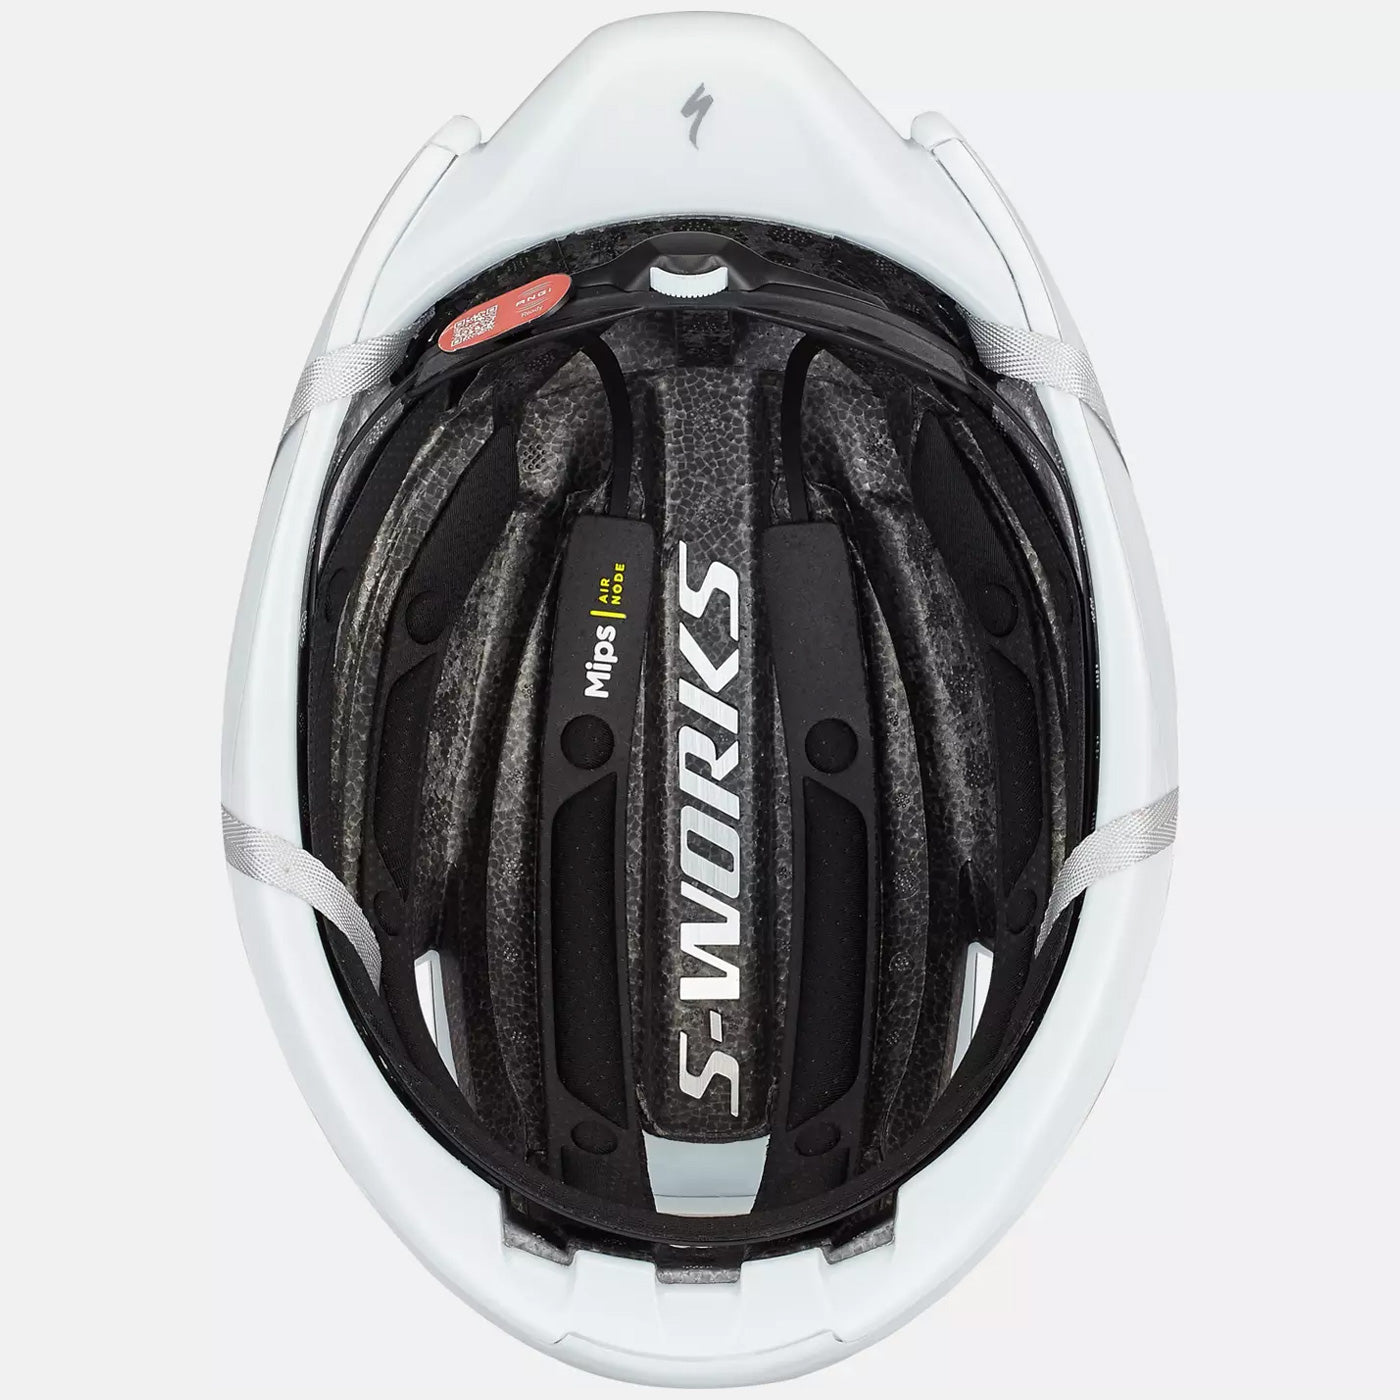 Specialized Evade 3 helm - Weiss